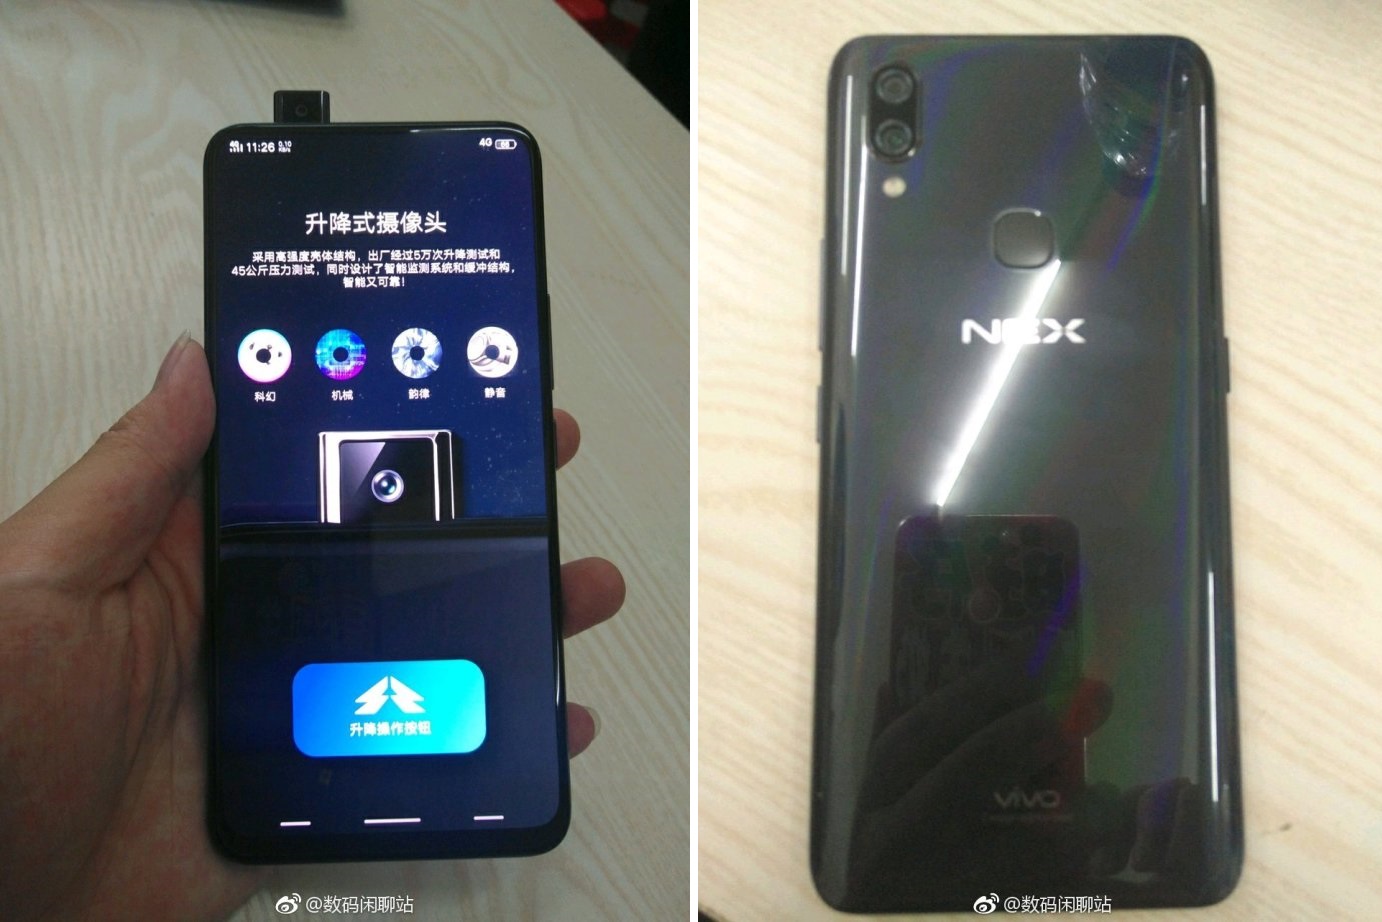 Leaked vivo NEX smartphone appears showing its 6.59-inch display with pop-up front camera